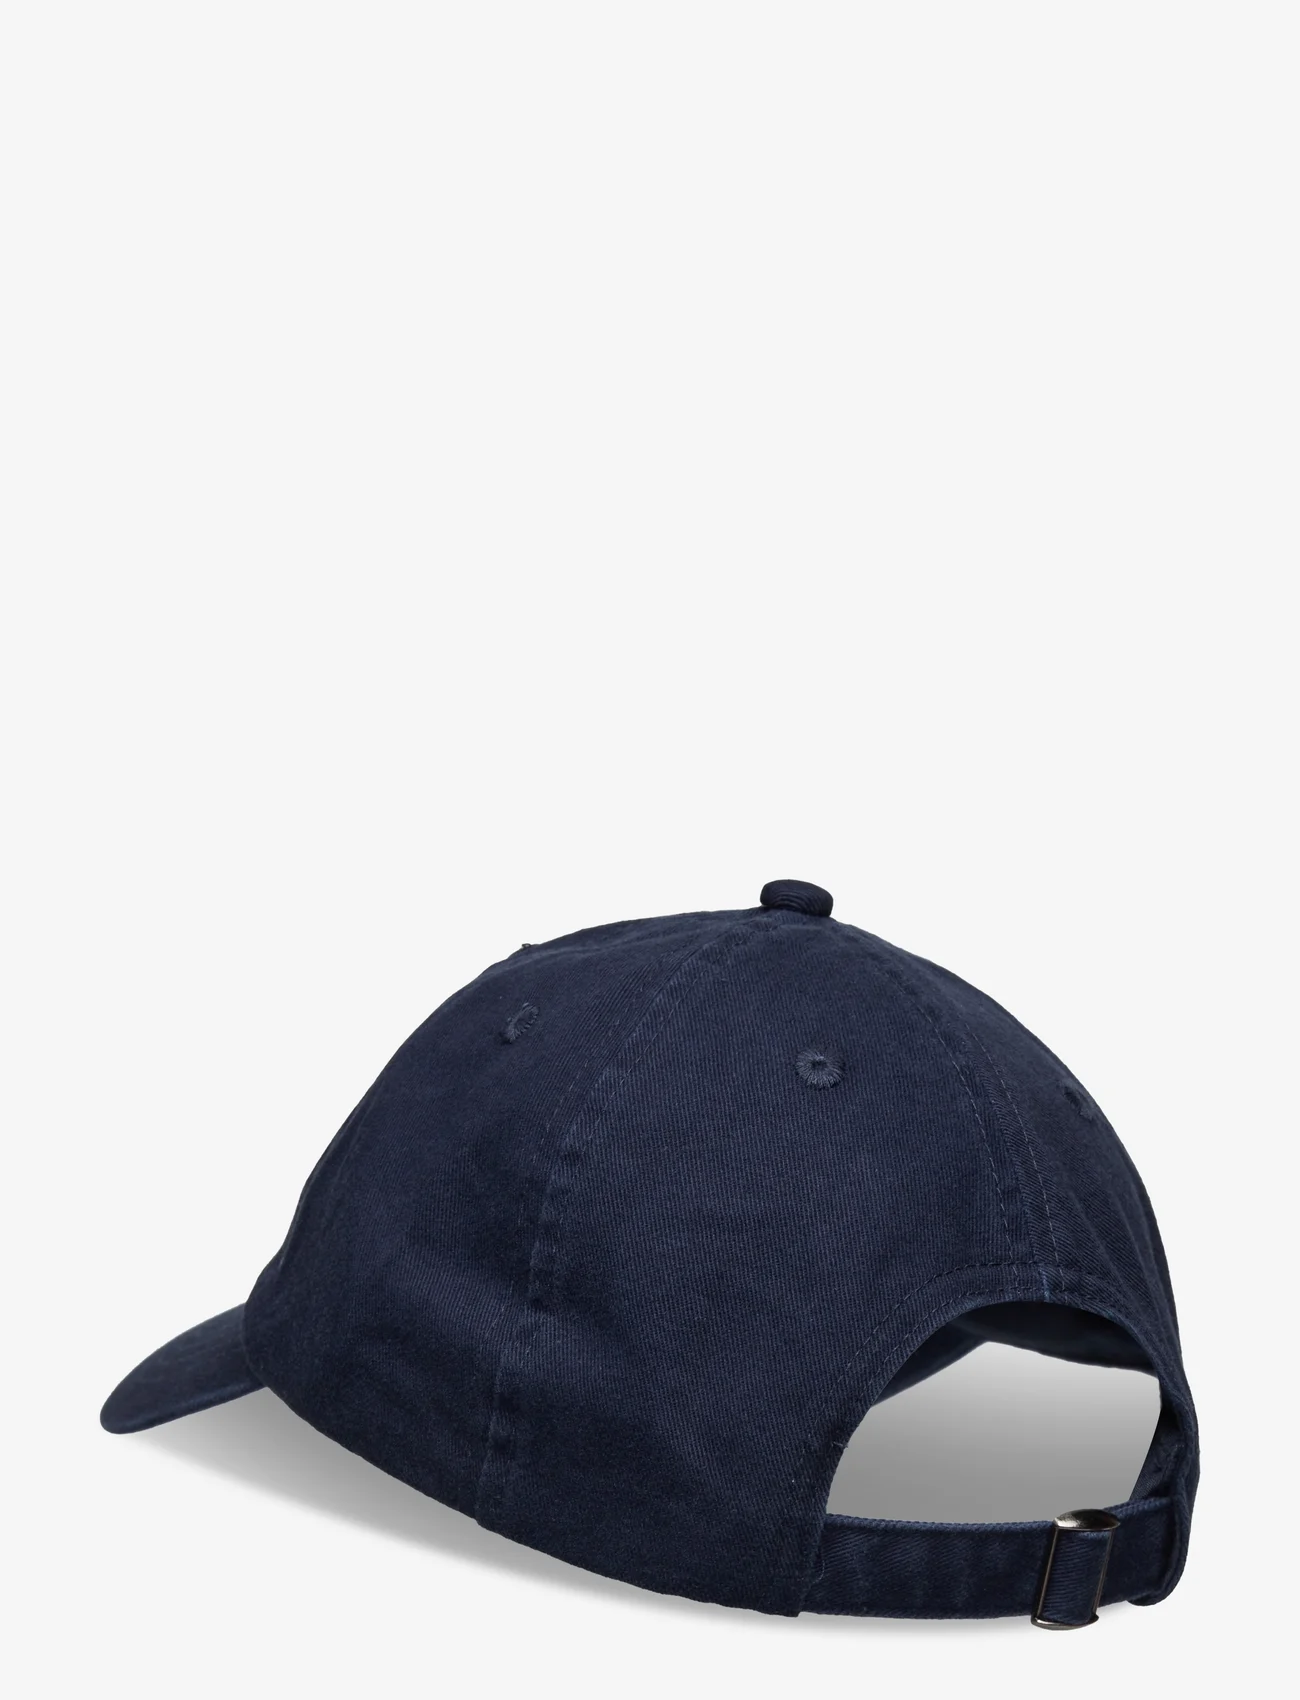 Double A by Wood Wood - Eli embroidery cap - kappen - navy - 1